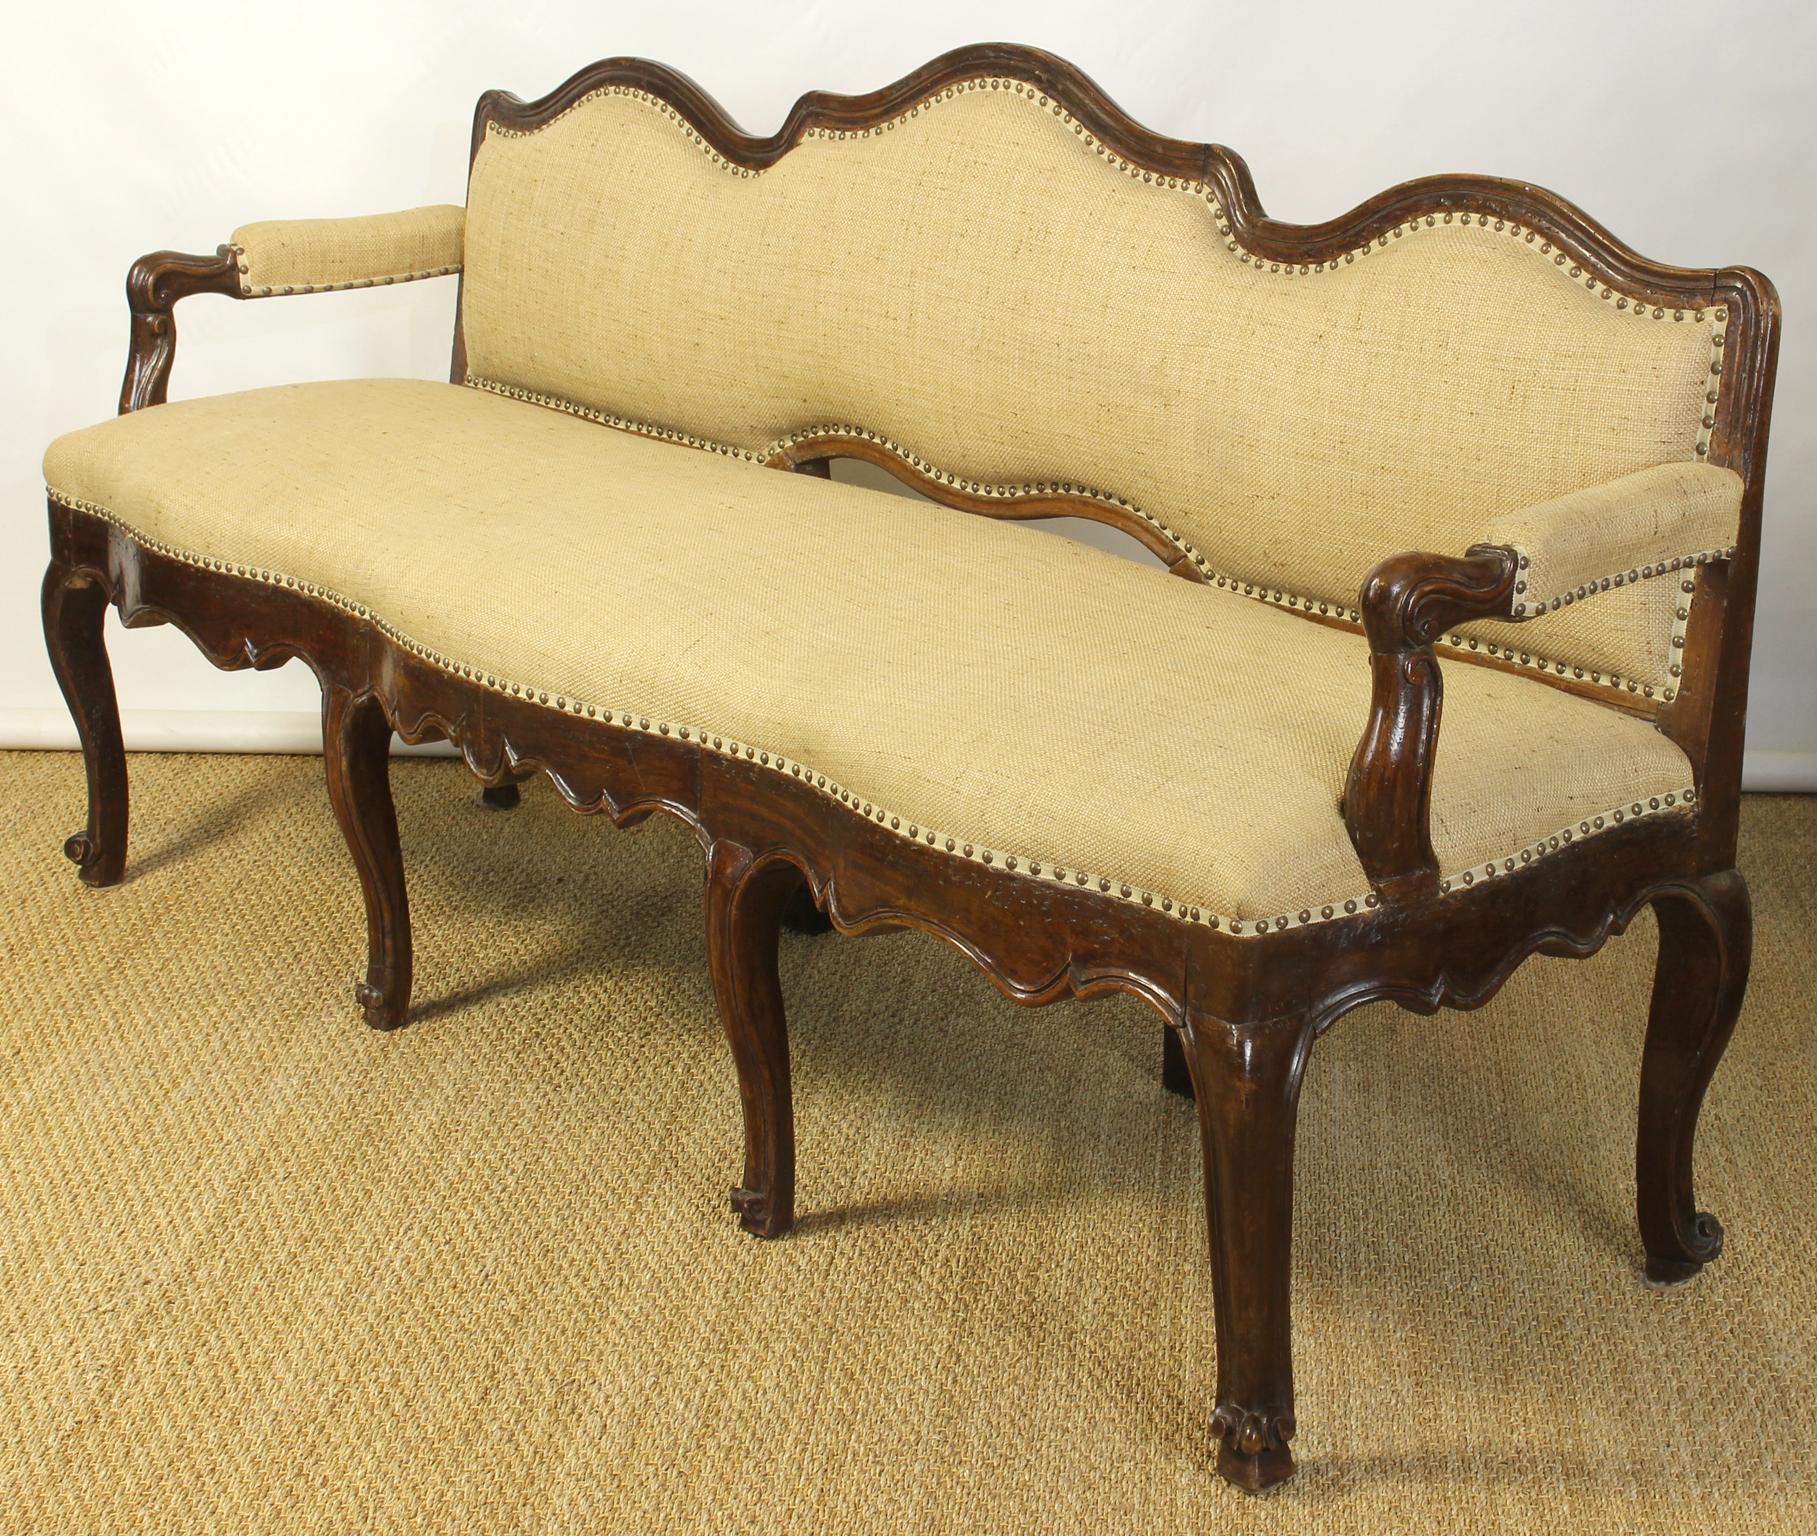 An exceptional and beautifully proportioned late 18th century. Italian carved walnut bench recently upholstered in a natural linen burlap fabric accented with brass nail heads.